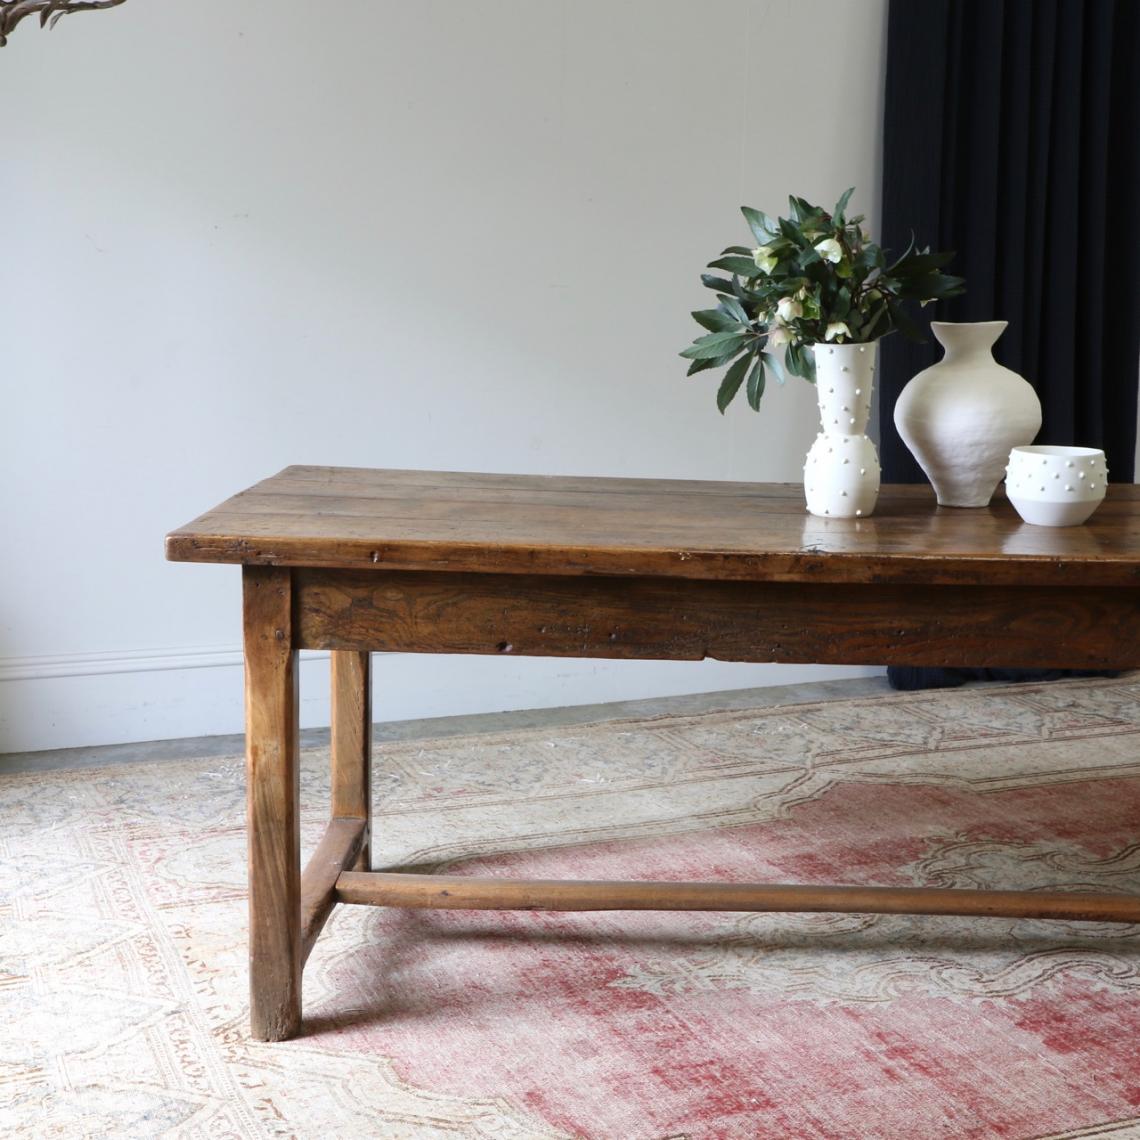 Stretcher-Base Dining Table 2.1 metres